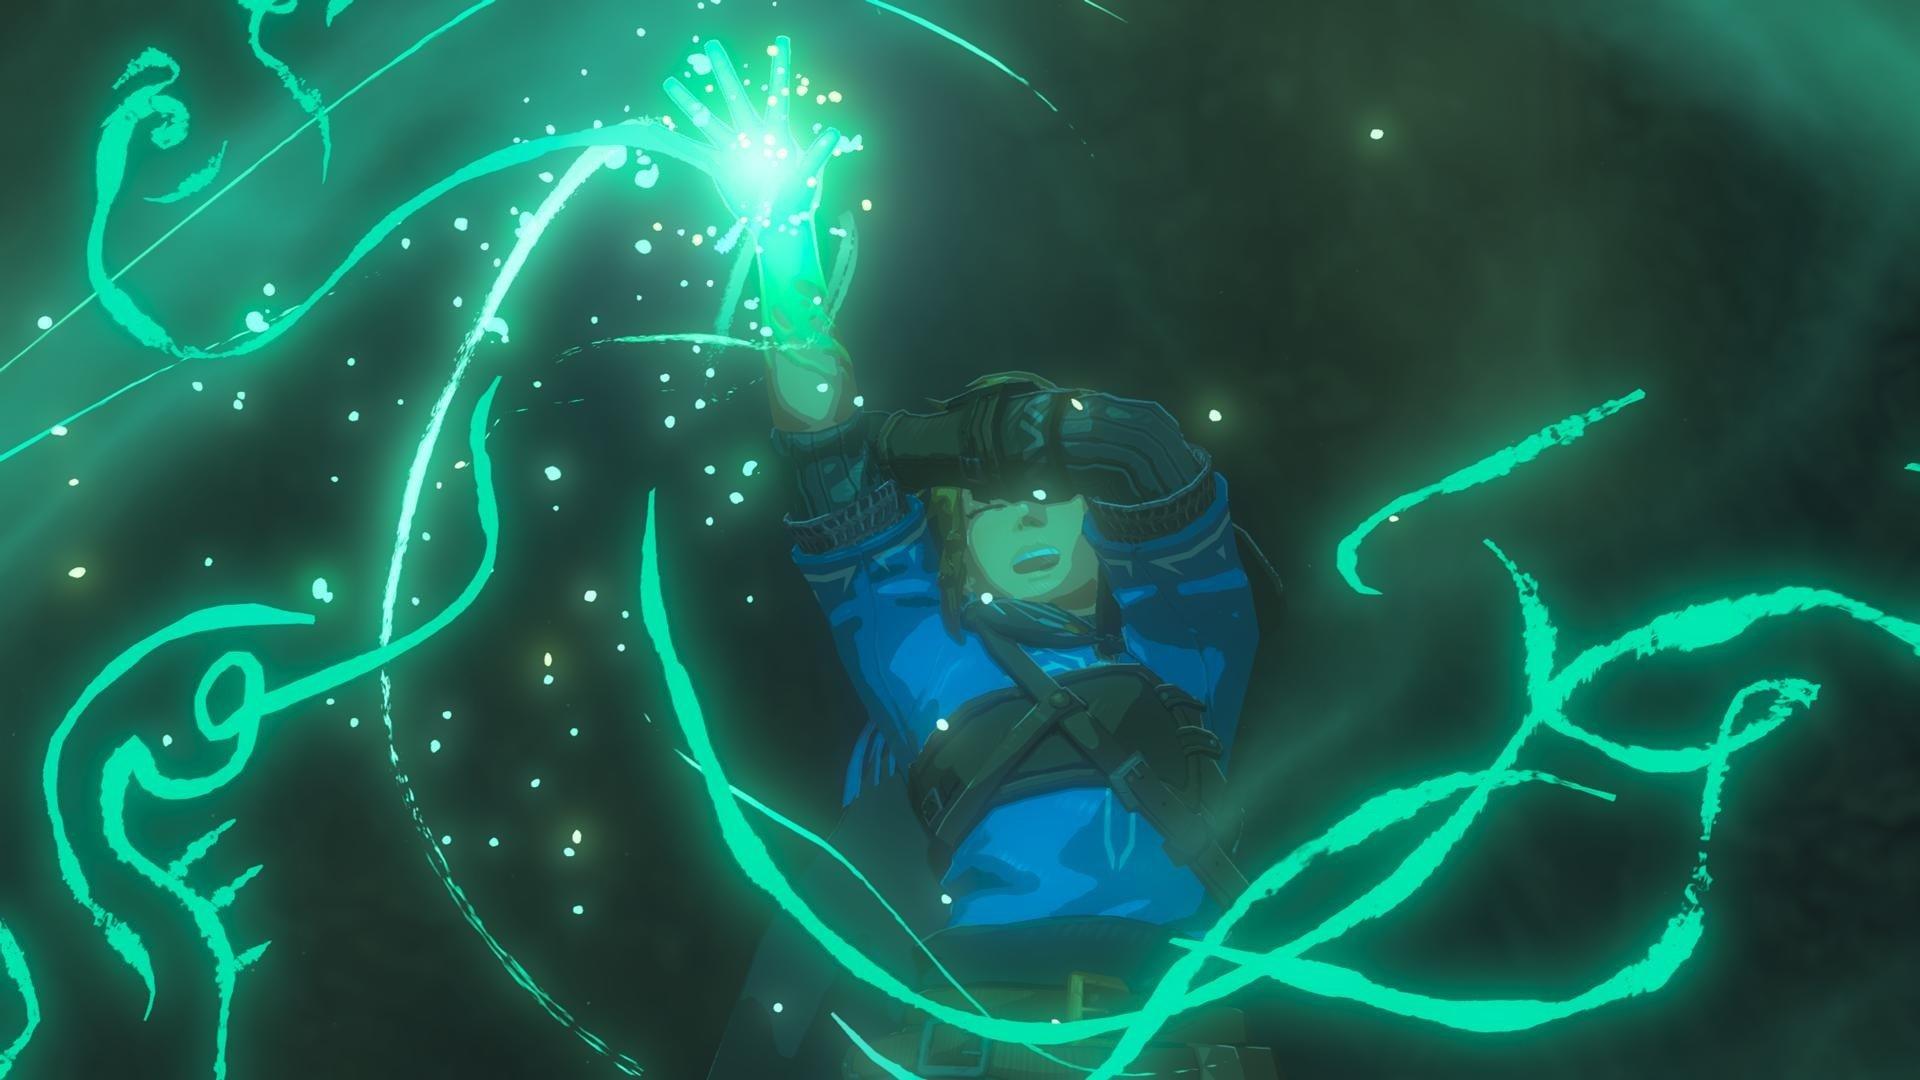 Where was Breath of the Wild 2 at The Game Awards 2019